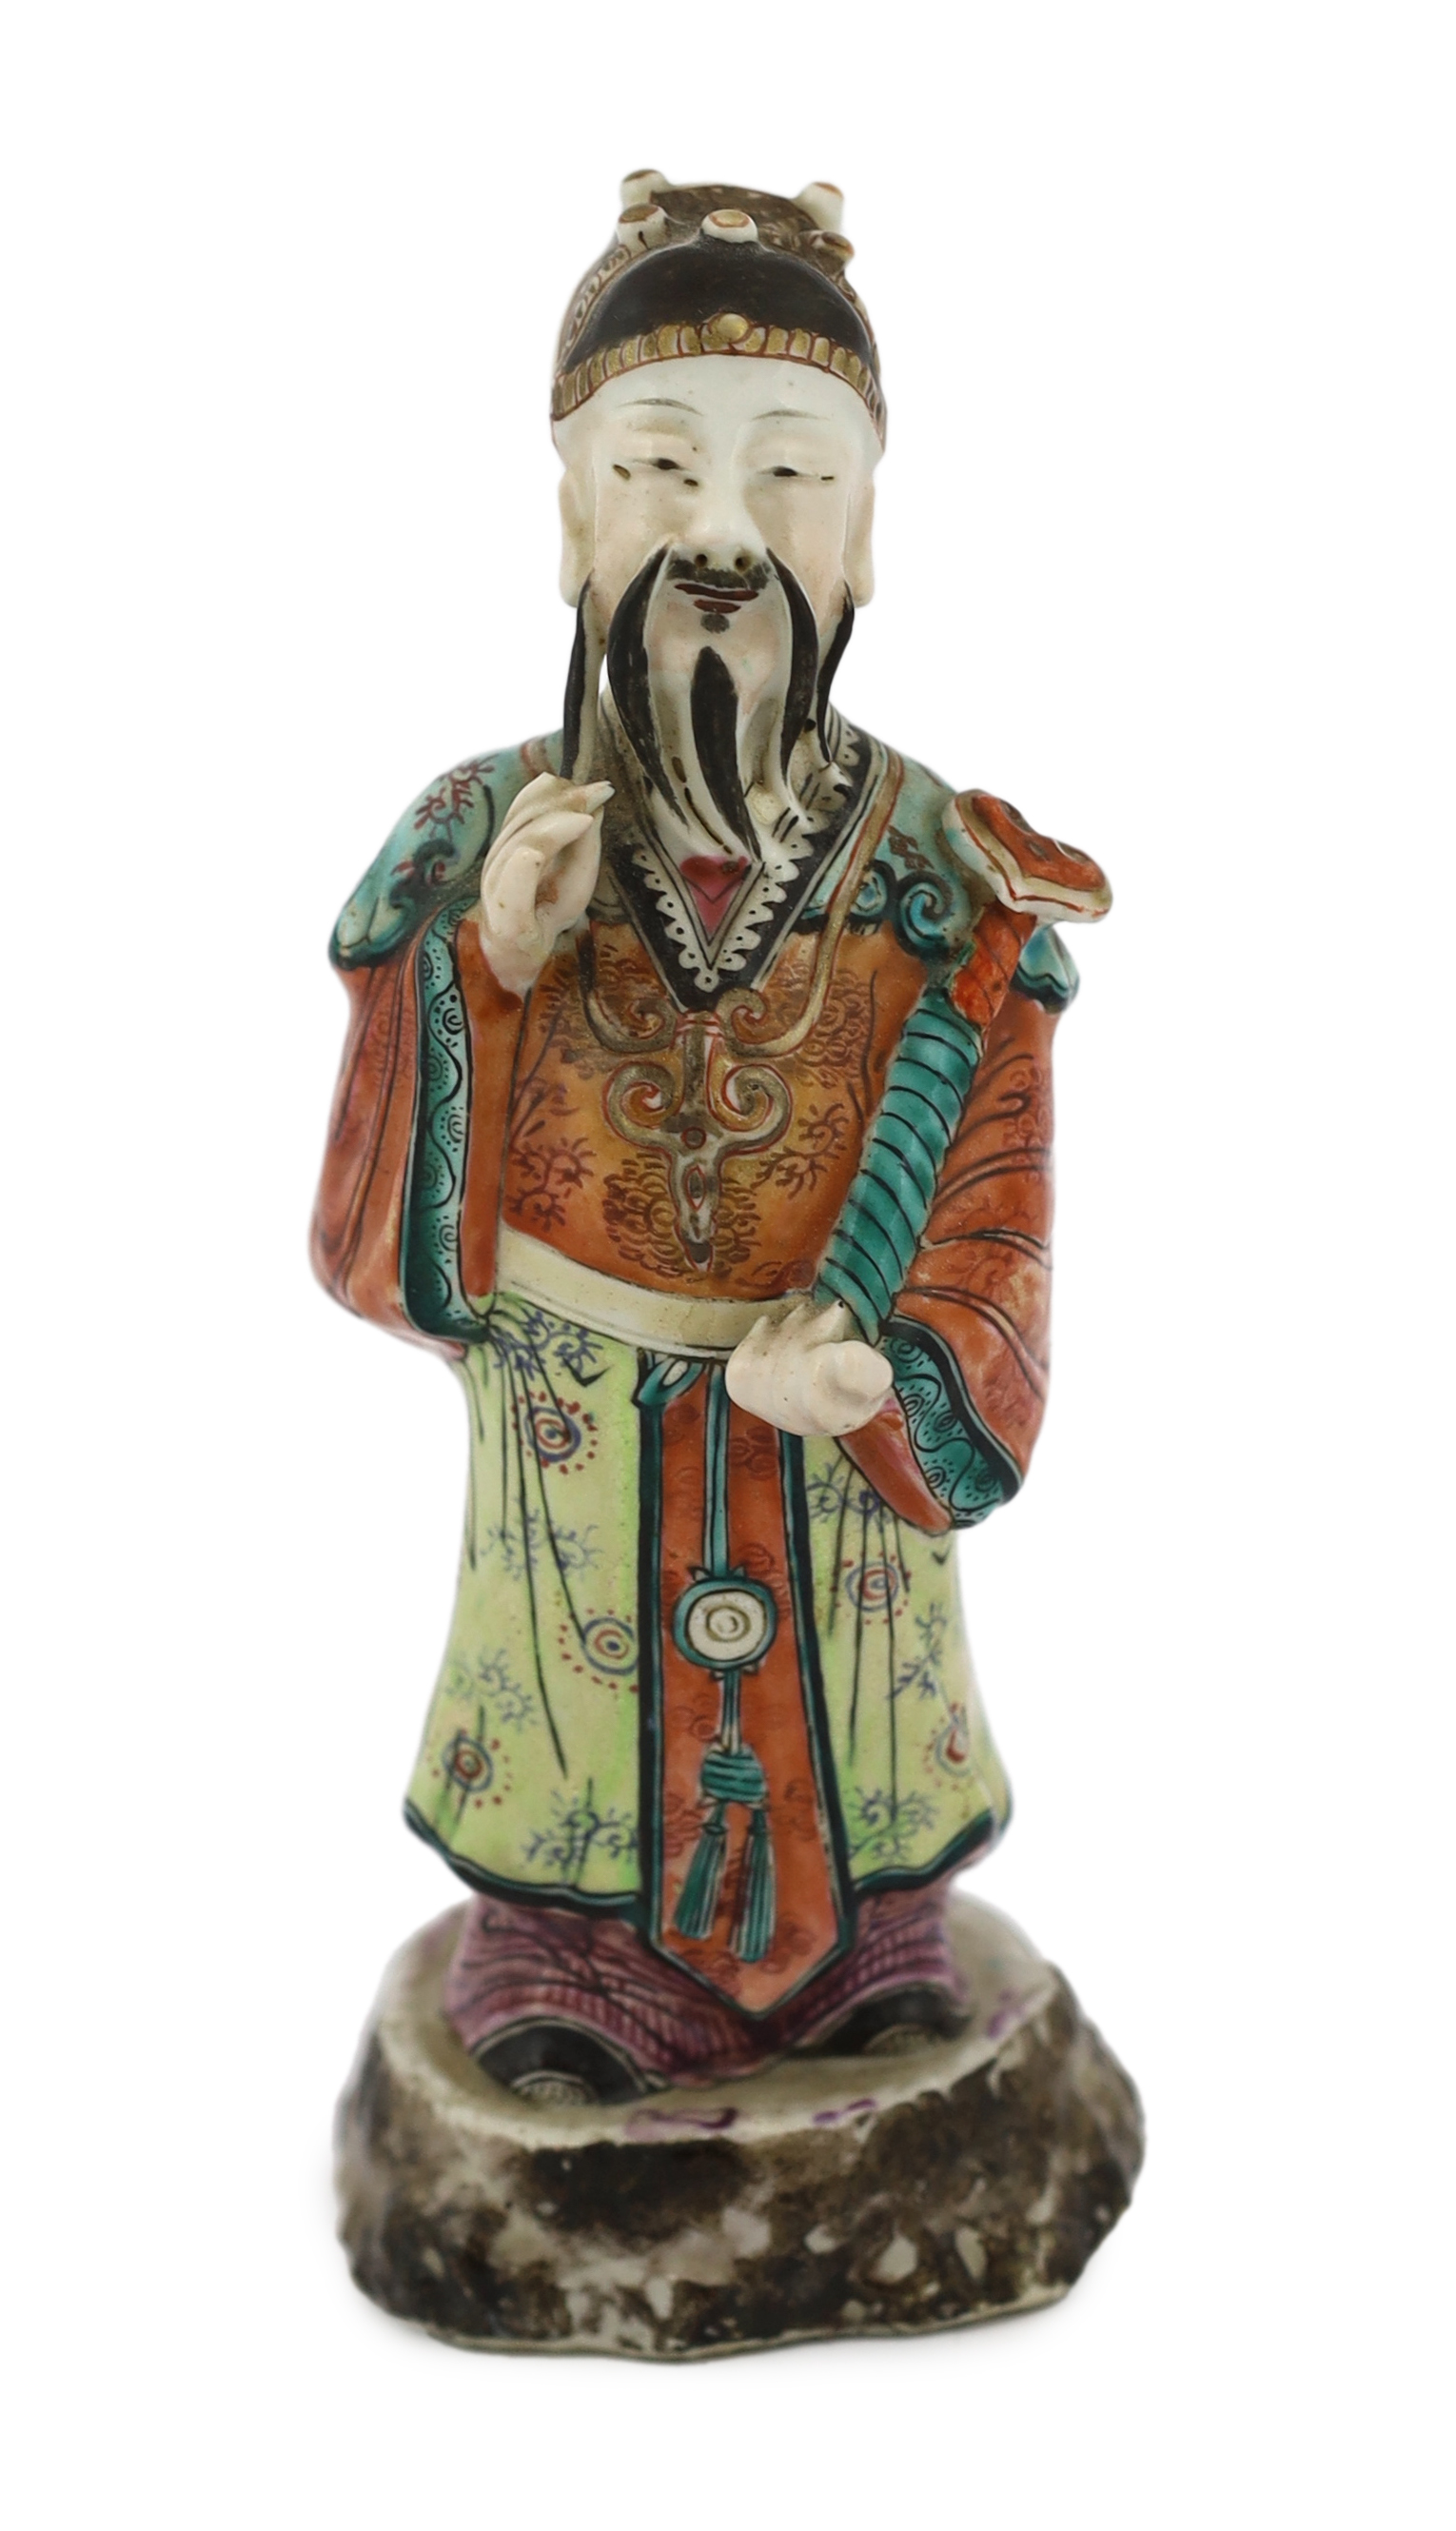 A Chinese enamelled porcelain figure of a court official, Jiaqing period (1796-1820), standing and